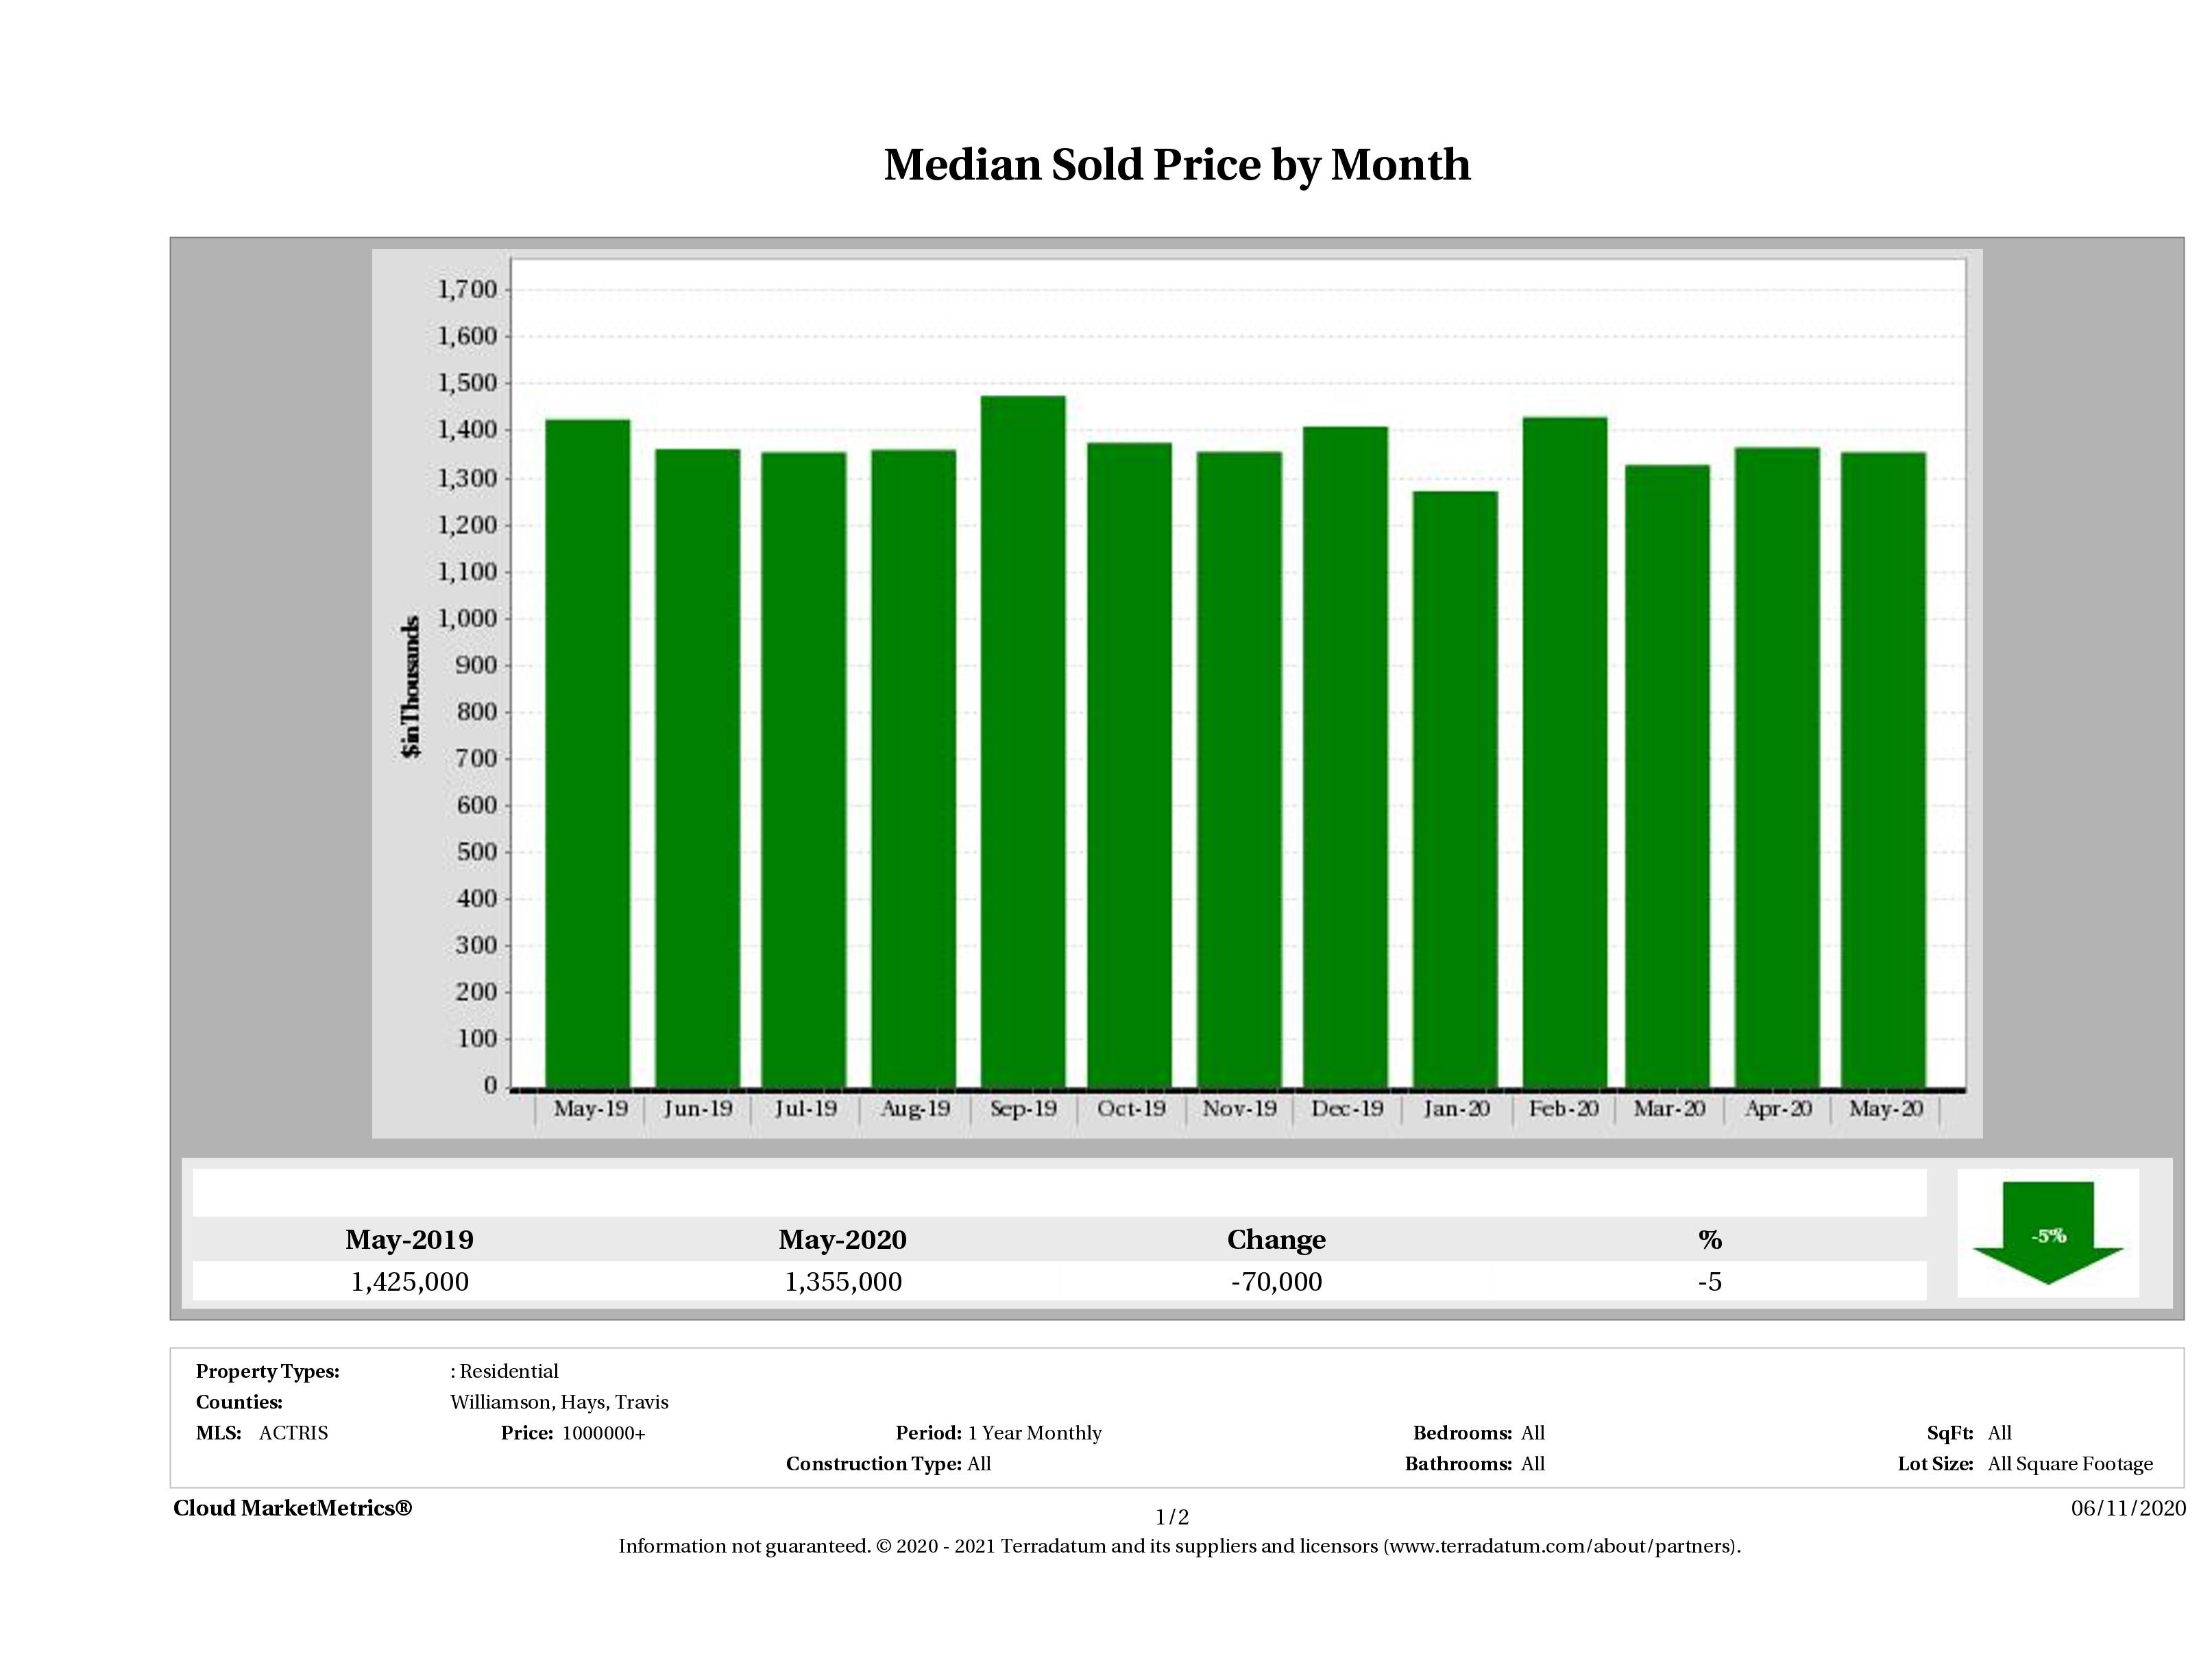 Austin median luxury home price May 2020